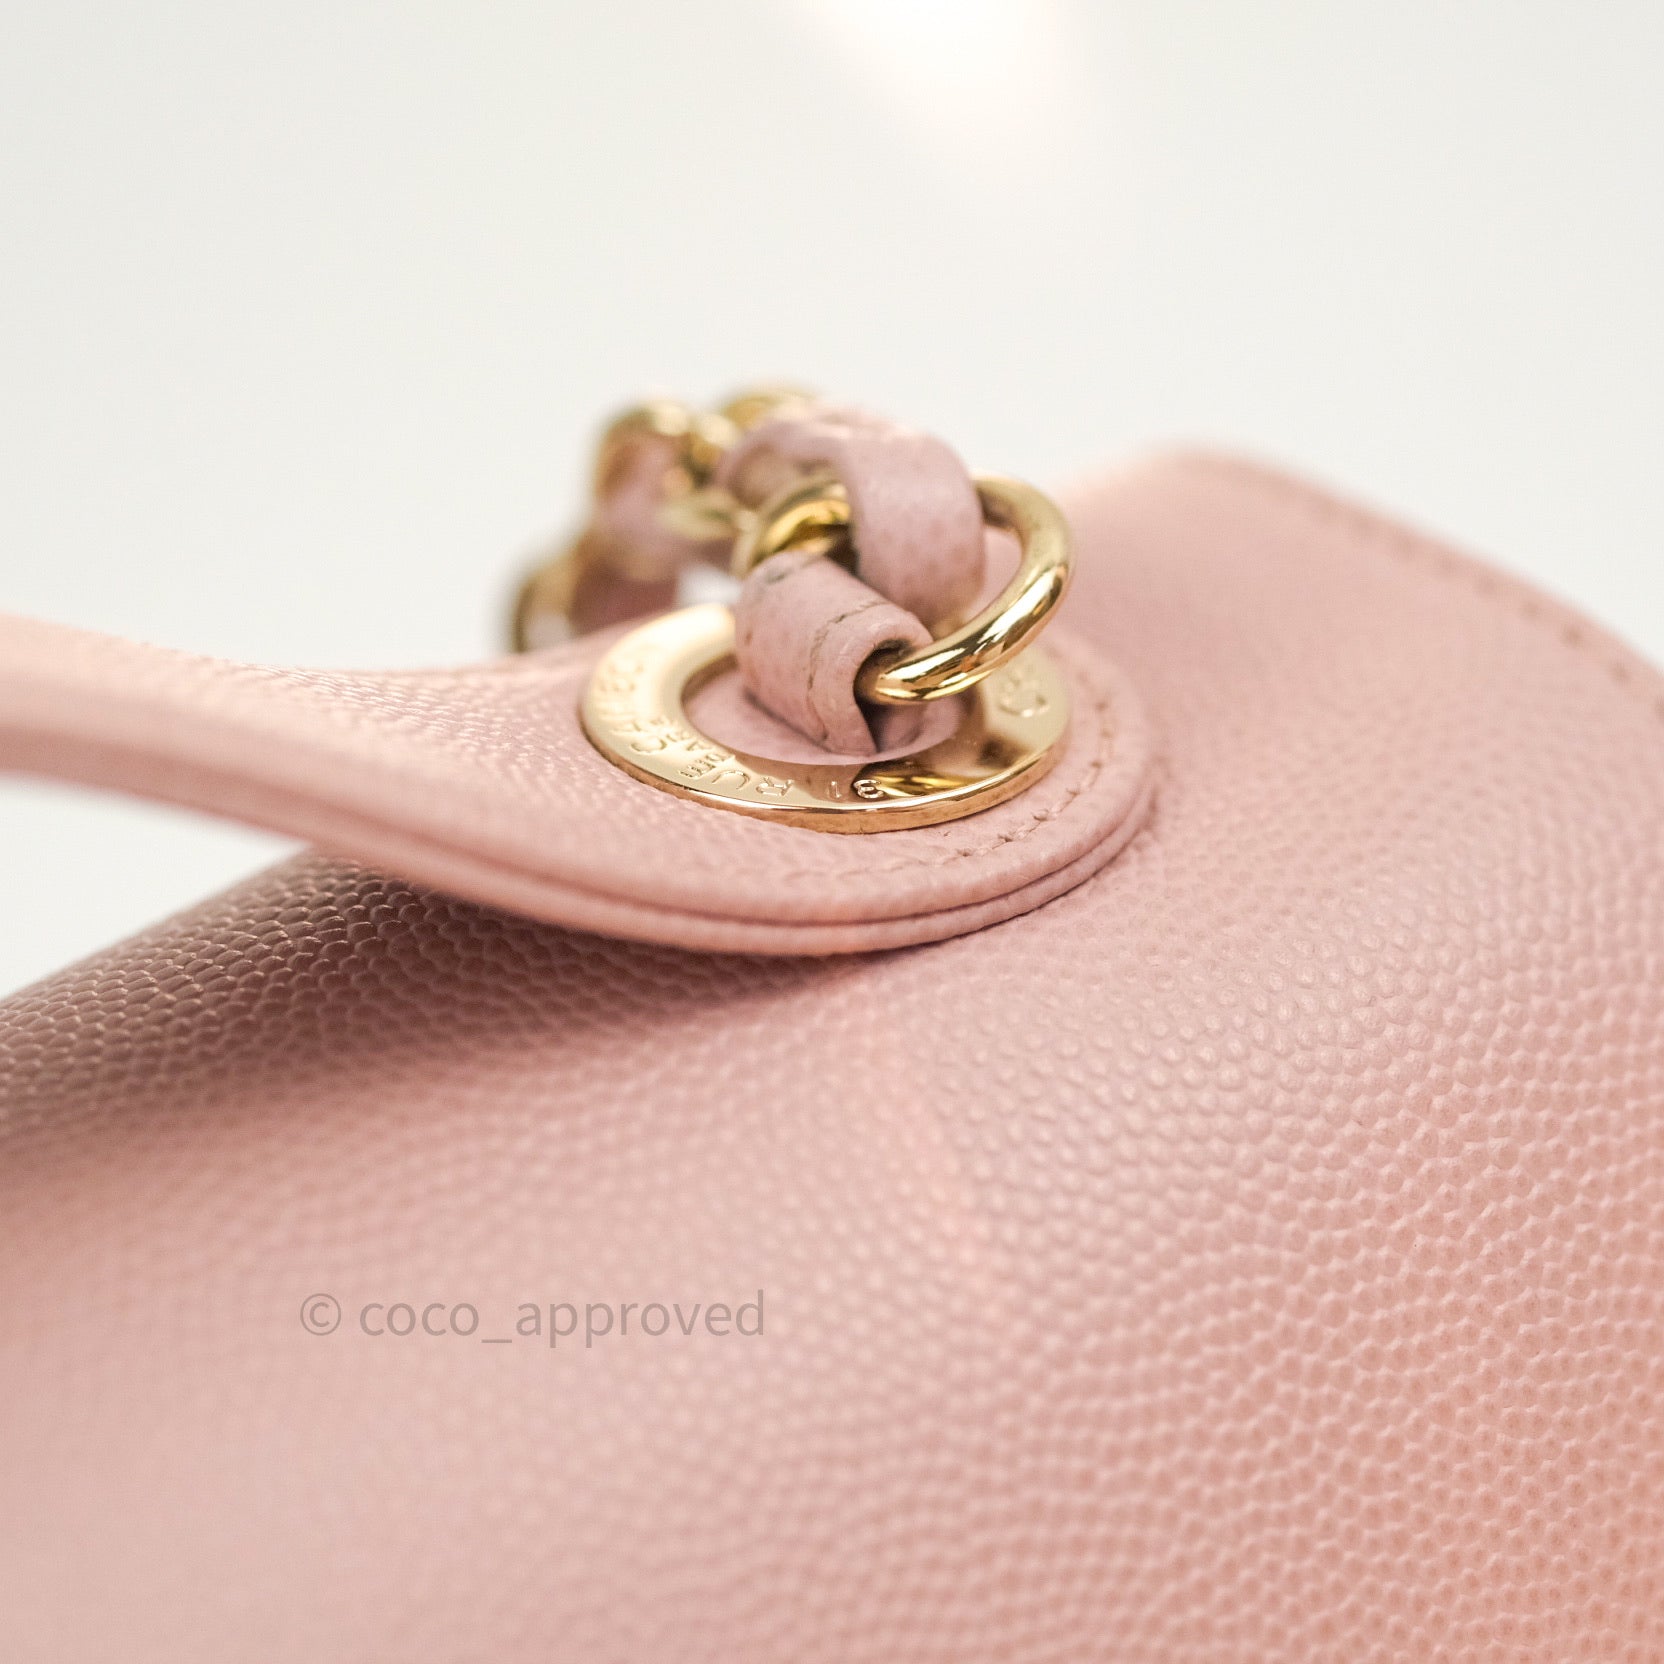 RARE🌸 CHANEL Small Rose Pink Business Affinity Flap Bag Quilted